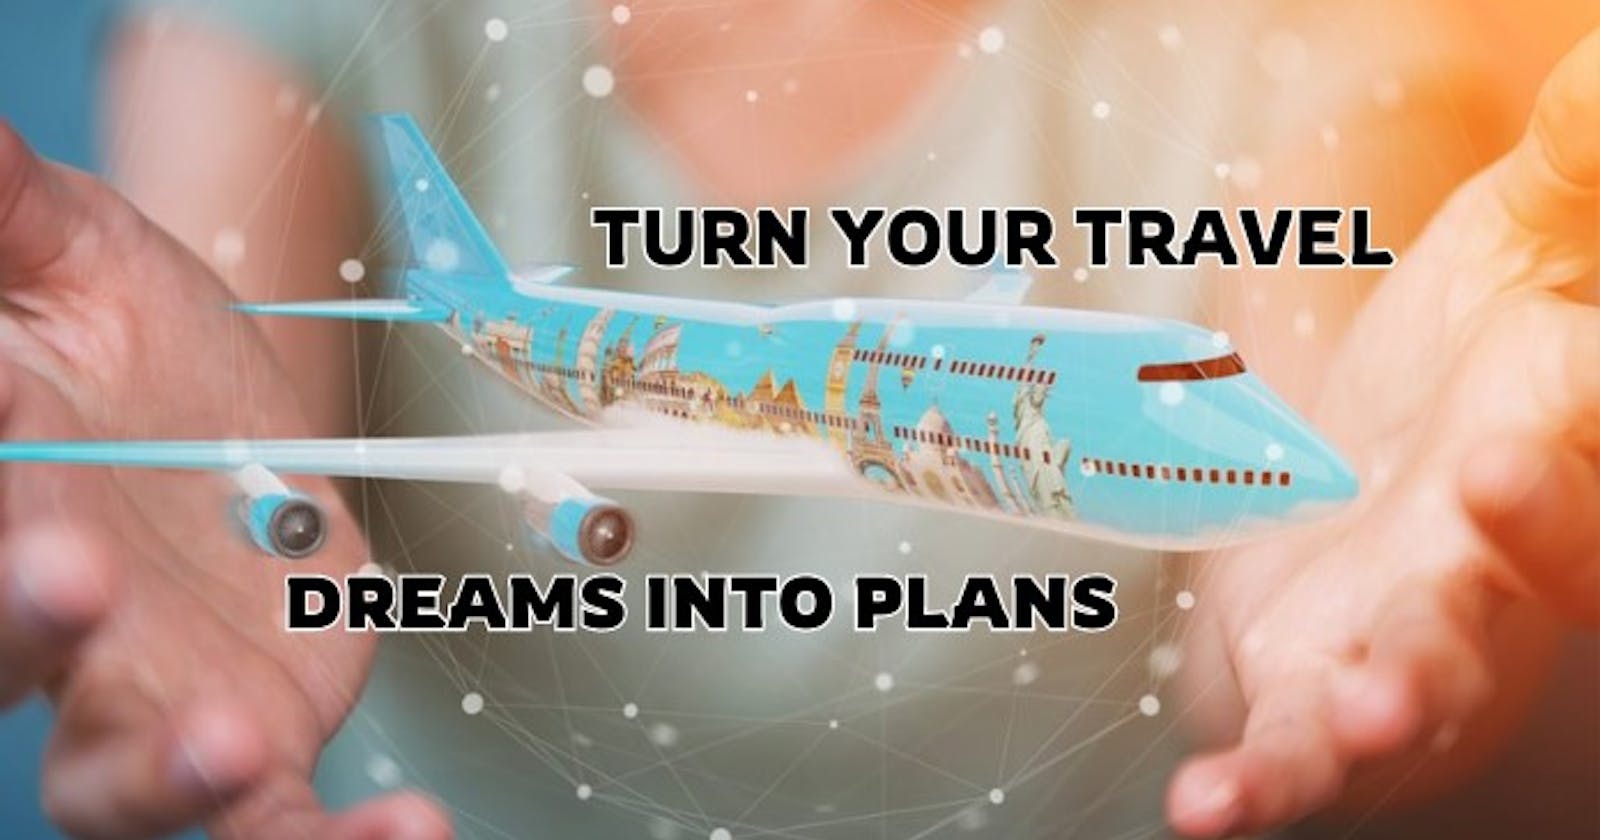 How to Turn Your Travel Dreams into Plans